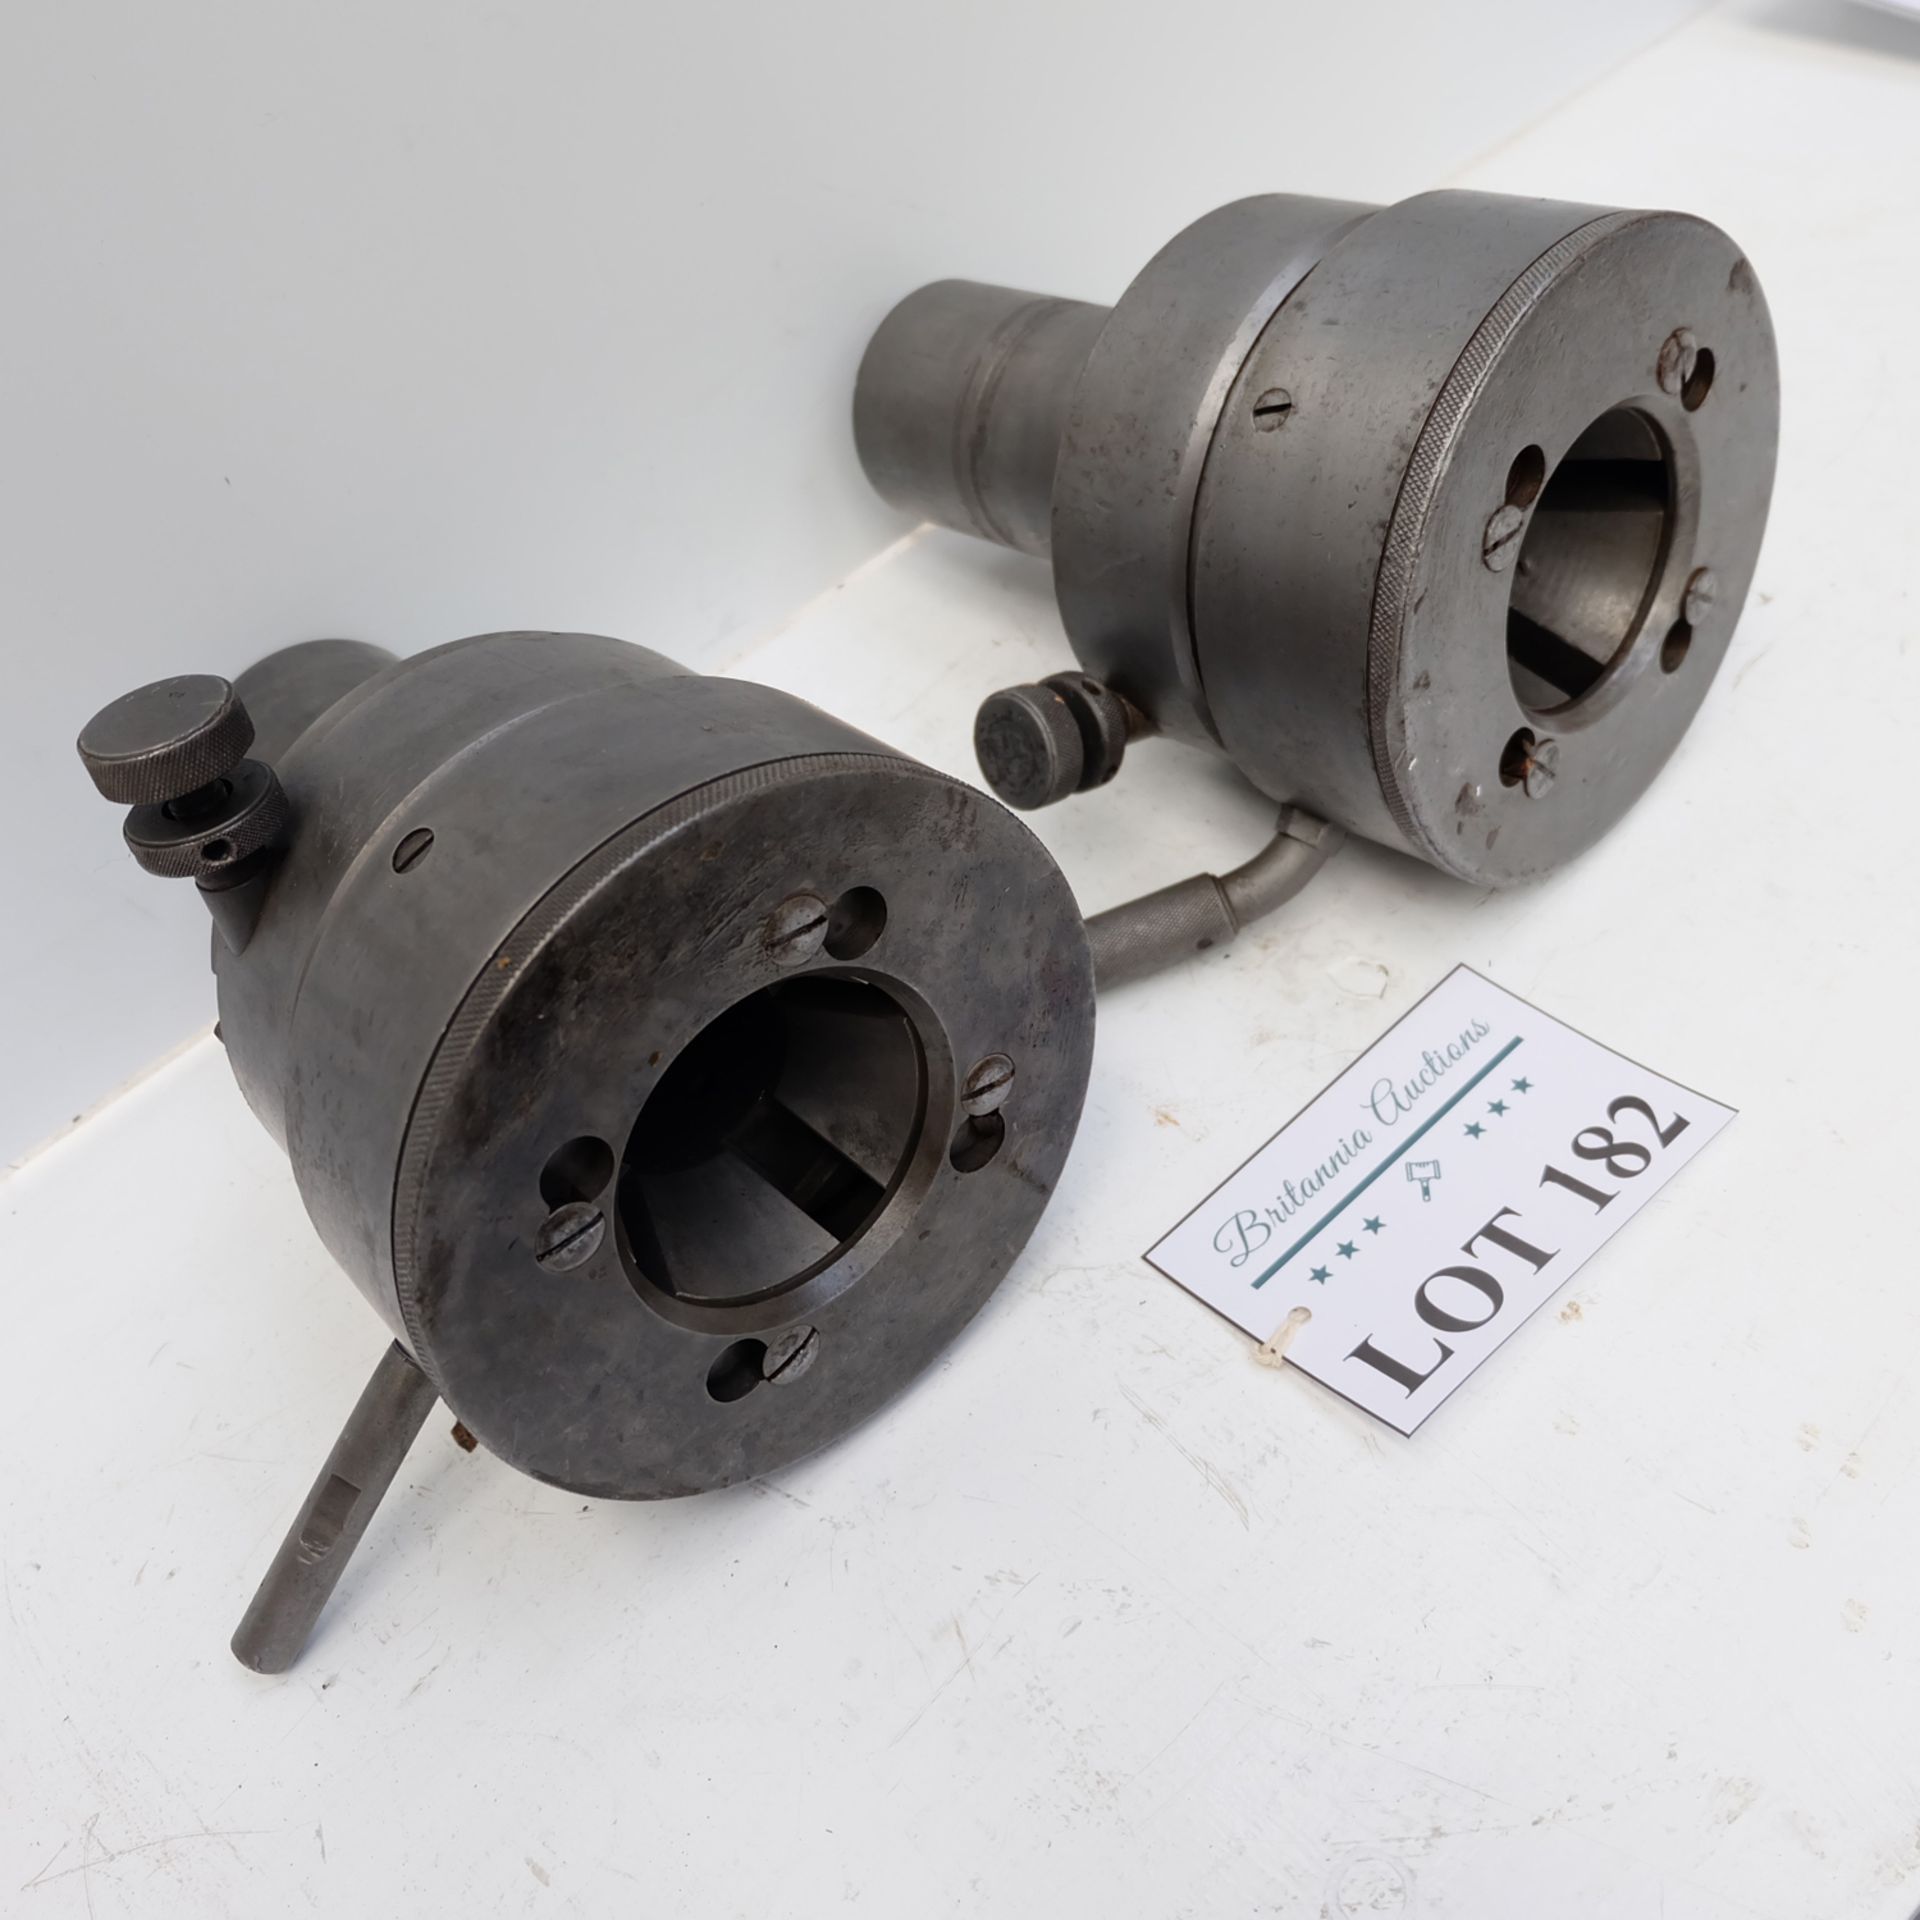 2 x Coventry Die Heads 2" Capacity 3 1/4" Spiggots. - Image 3 of 5